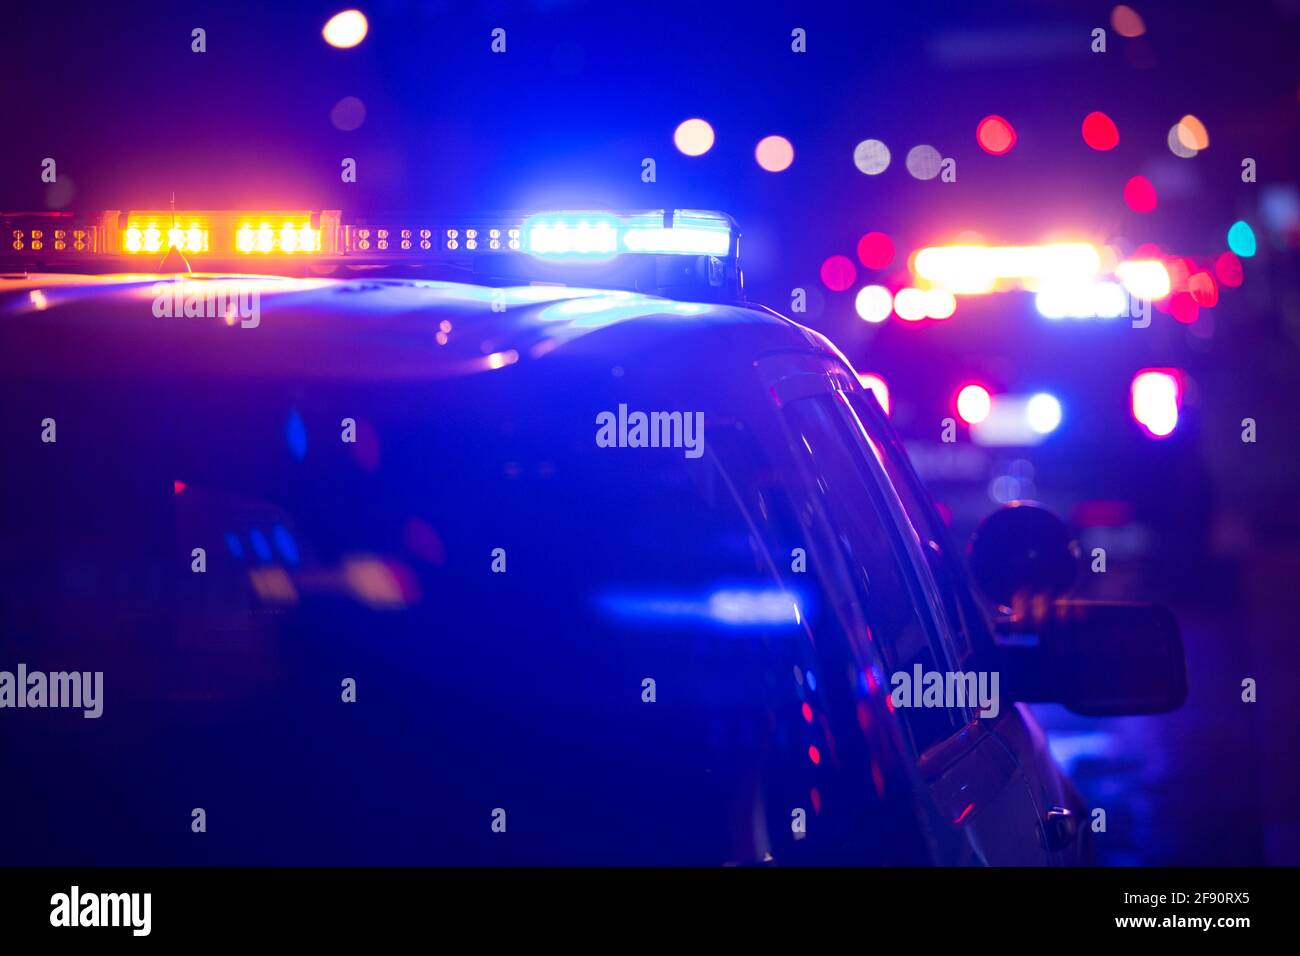 Police units responds to the scene of an emergency. Stock Photo